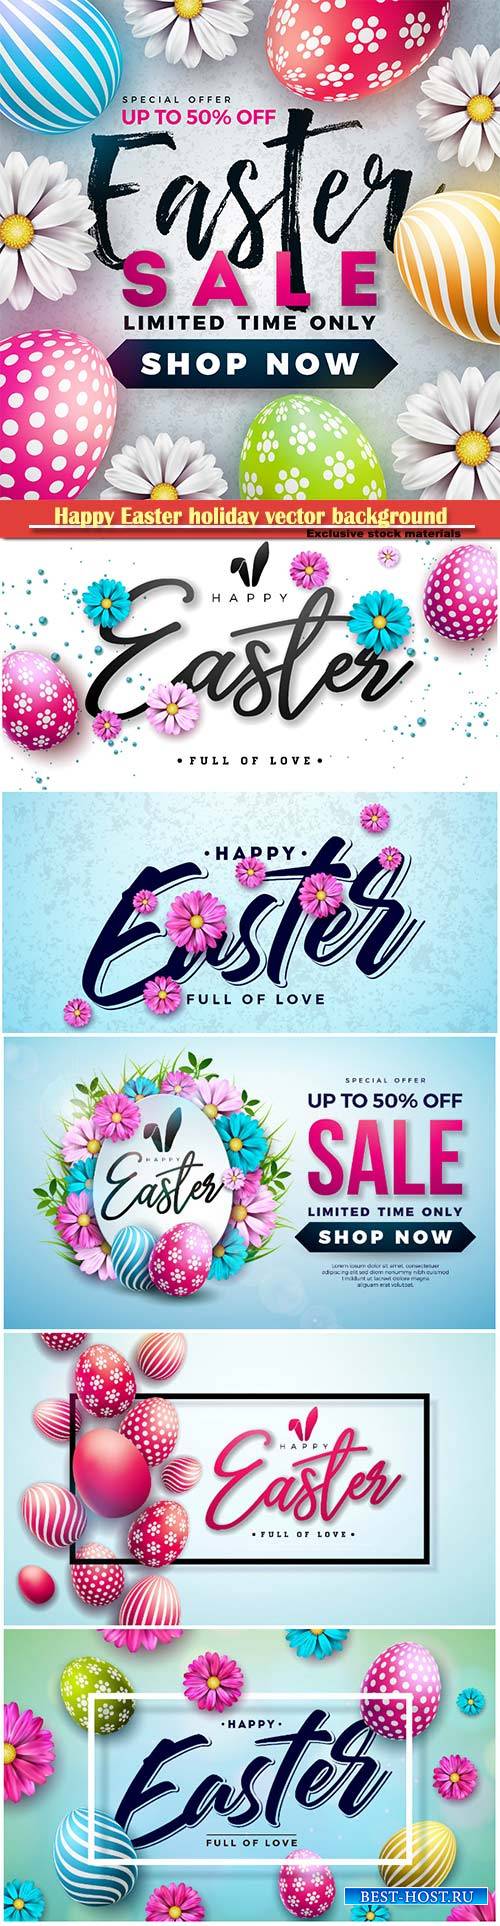 Easter sale vector illustration with eggs and spring flower